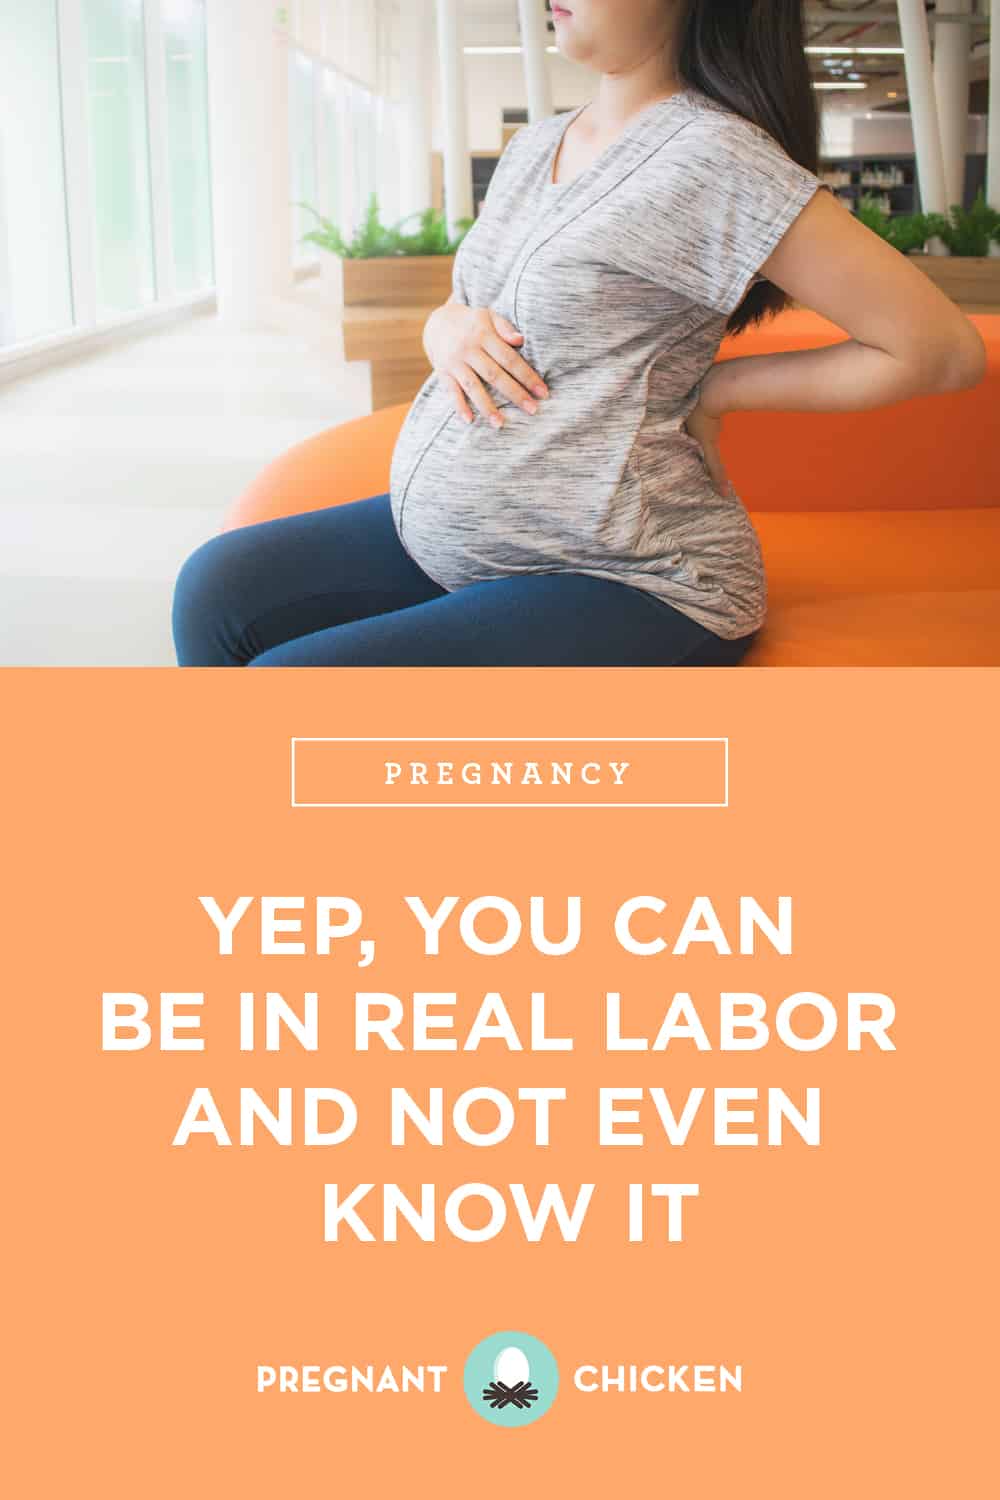 Sometimes the signs of labor are a little harder to read than just contractions. Here are some tips to watch out for during your pregnancy. #laborsigns #activelaborsigns #symptomsoflabor #goingintolabor #laborpains #laborcontractions #labortips #pregnancy